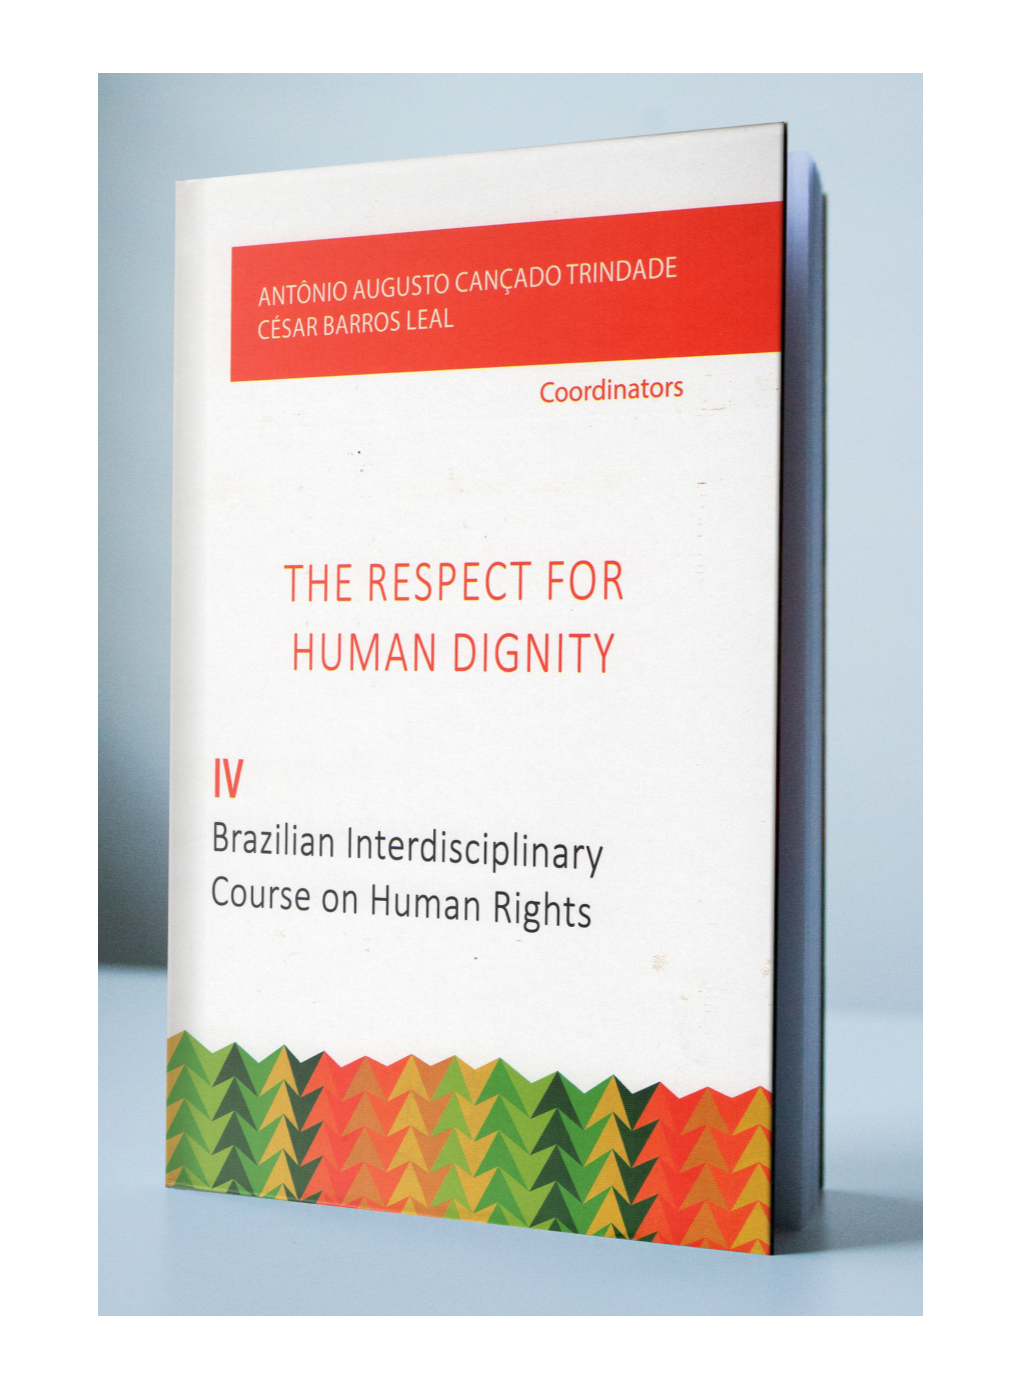 The Respect for Human Dignity (Inglês) 2015.Indd